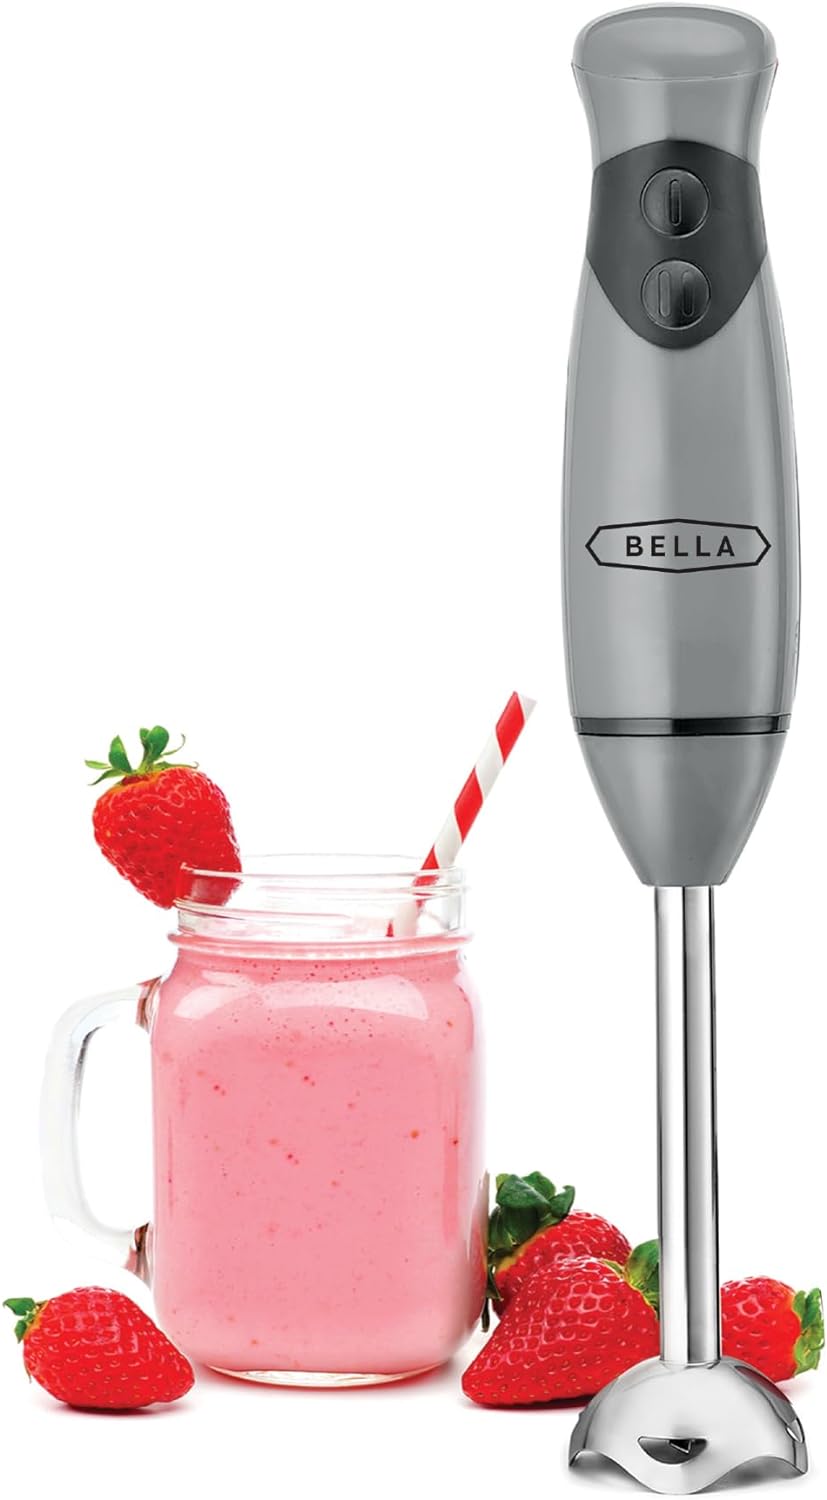 BELLA Immersion Hand Blender, Portable Mixer with Whisk Attachment - Electric Handheld Juicer, Shakes, Baby Food and Smoothie Maker, Stainless Steel, Grey